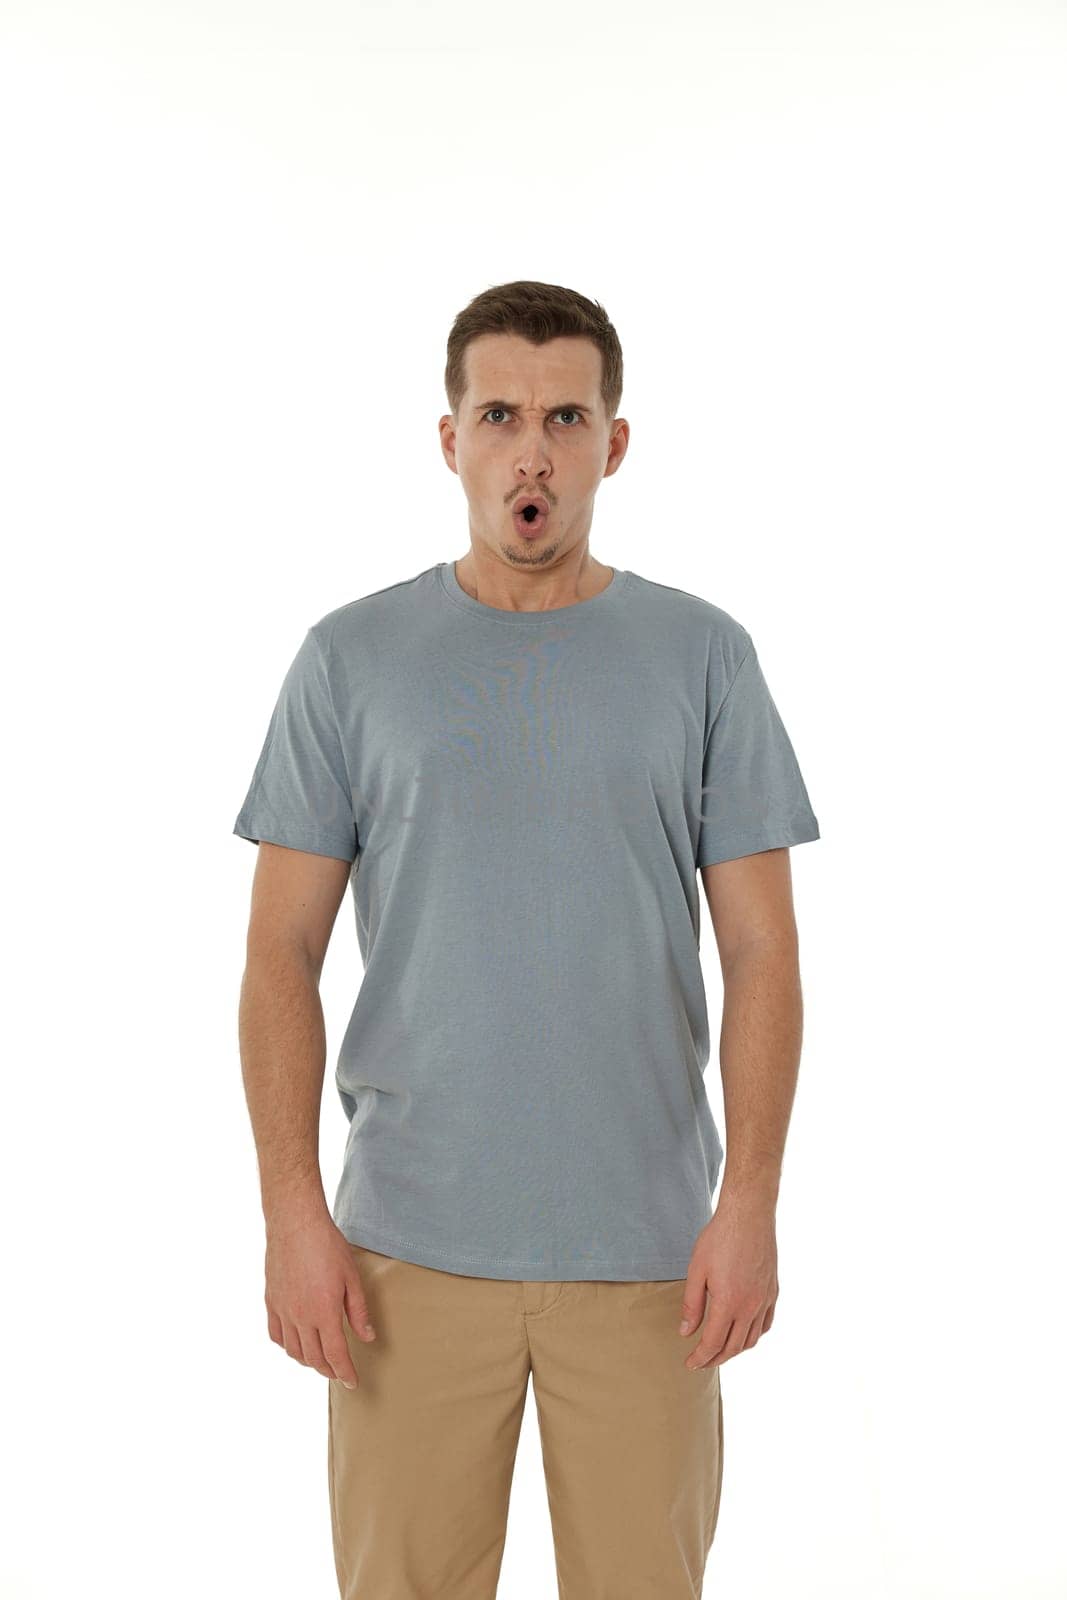 surprised guy looking at camera on white studio background